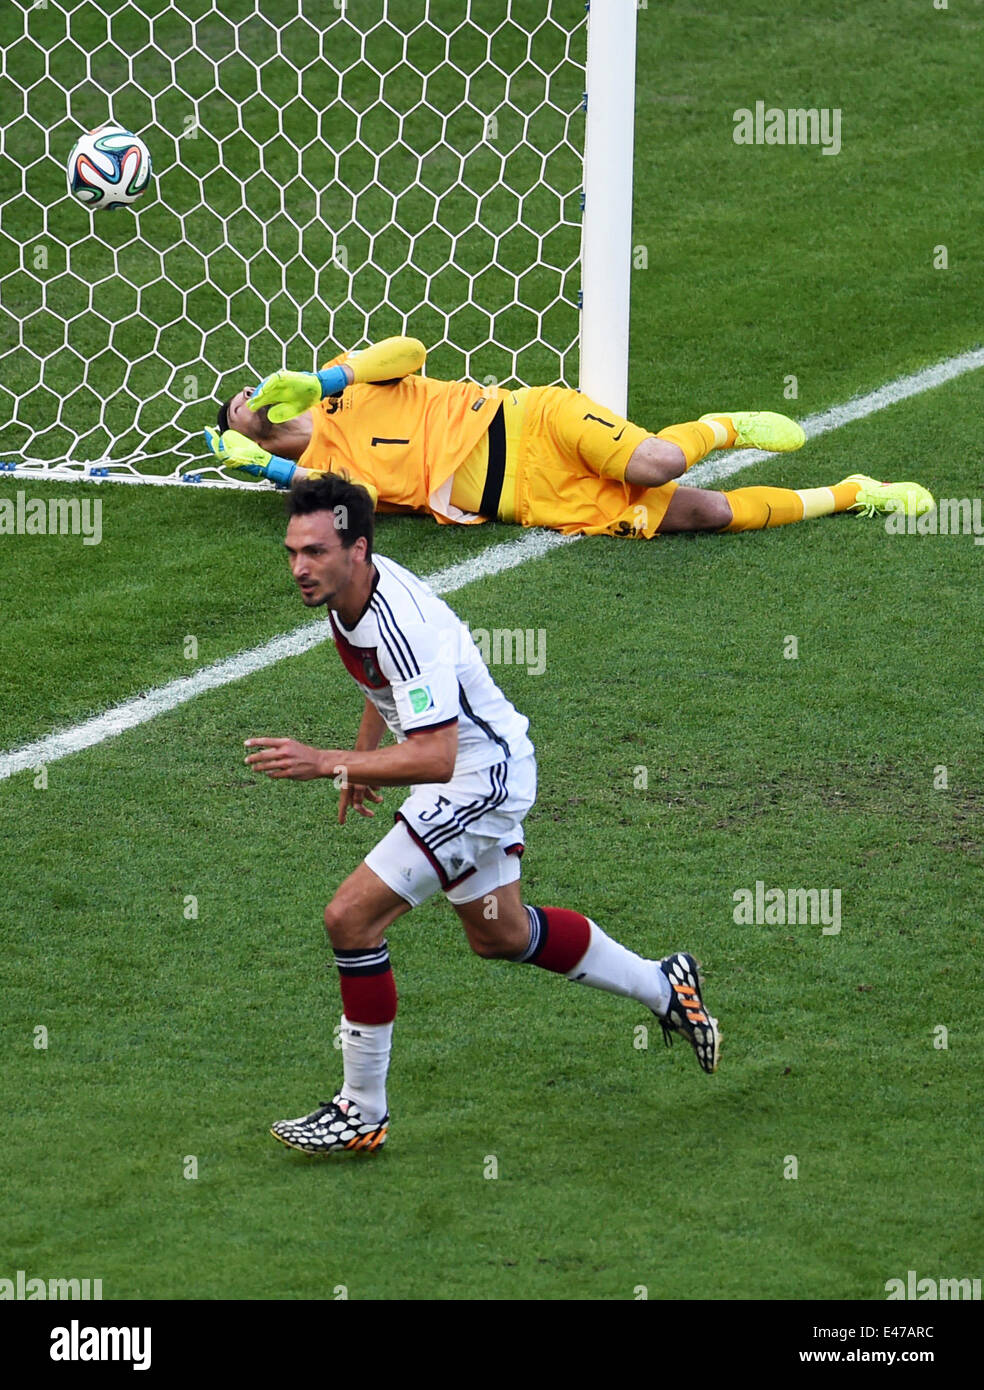 Rio de Janeiro, Brazil. 04th July, 2014. Mats Hummels of Germany scores 0-1 goal against goalkeeper Hugo Lloris (top) of France during the FIFA World Cup 2014 quarter final soccer match between France and Germany at Estadio do Maracana in Rio de Janeiro, Brazil, 04 July 2014. Photo: Marcus Brandt/dpa/Alamy Live News Stock Photo